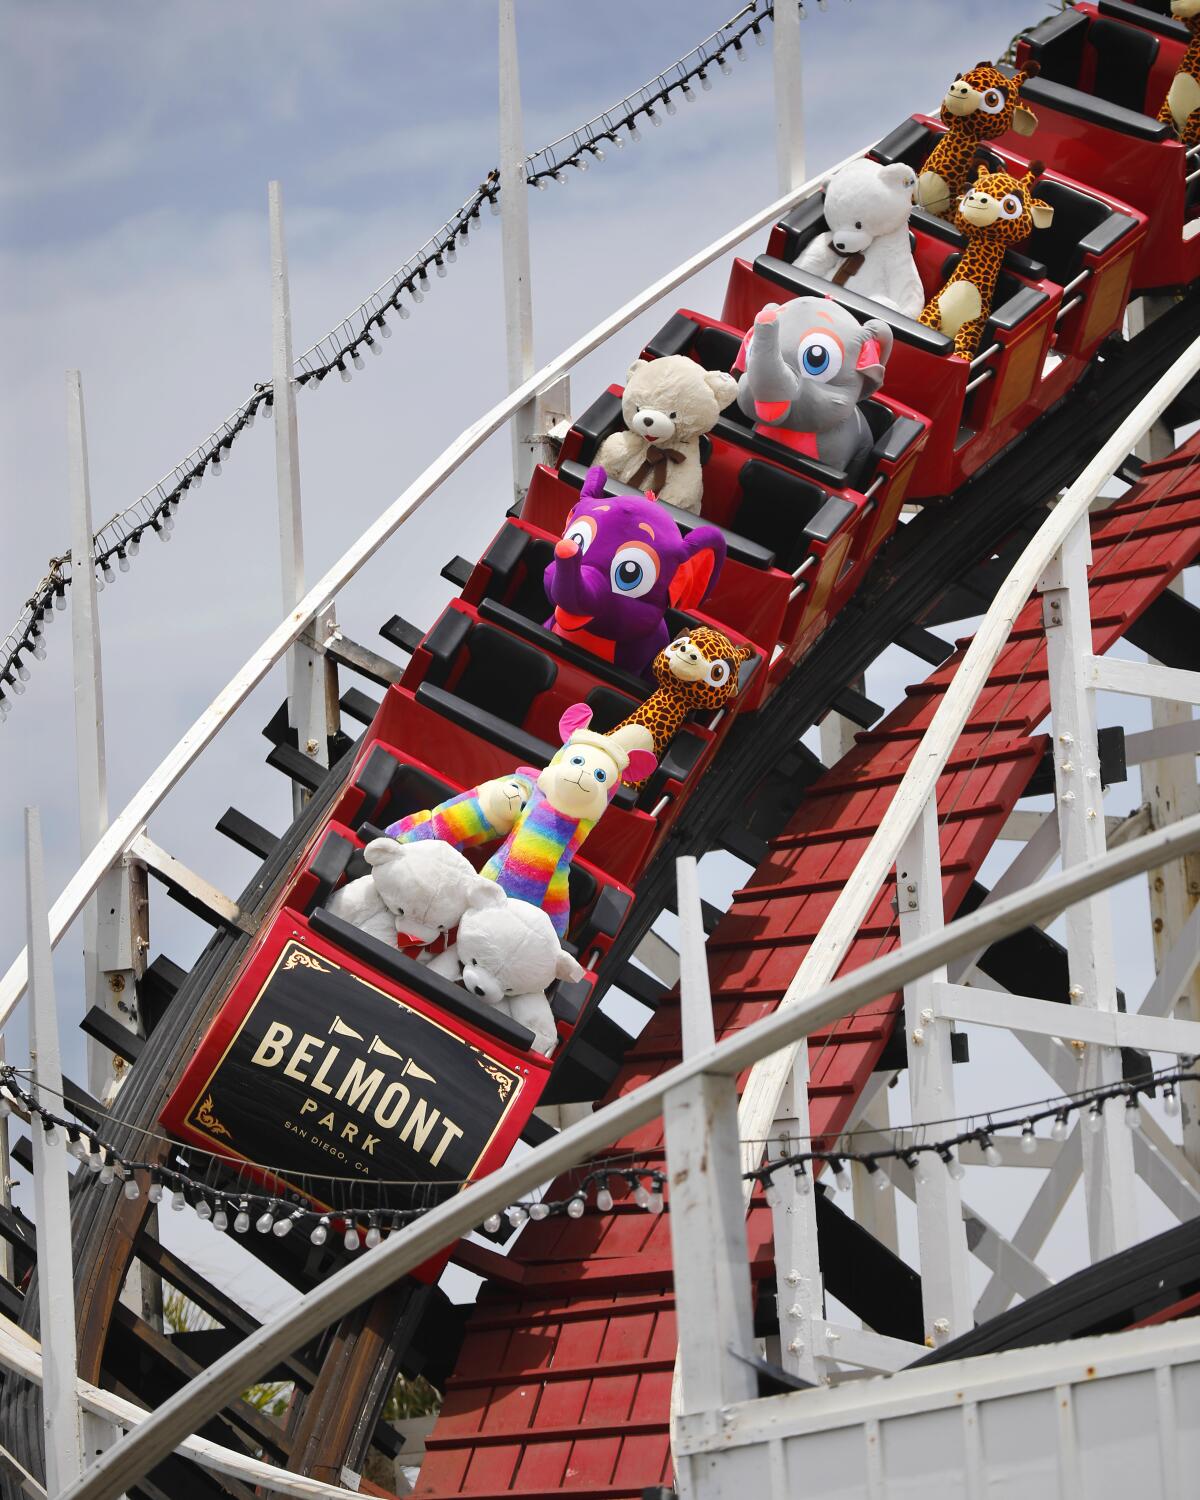 Giant stuffed animals test ride roller coasters while theme parks